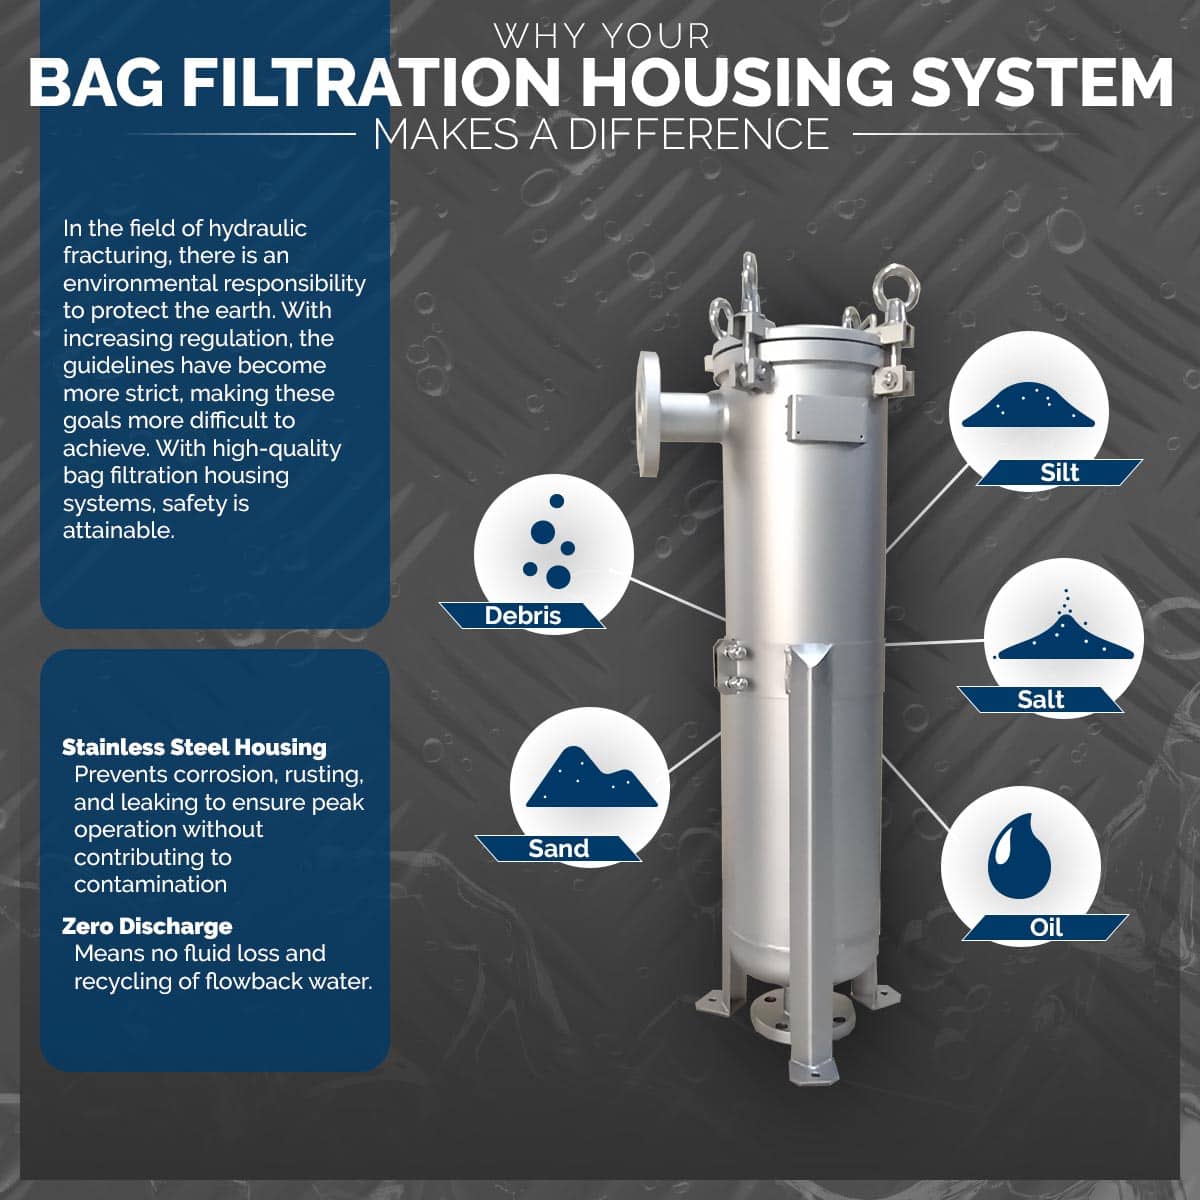 Why-Your-Bag-Filtration-Housing-System-Makes-A-DifferenceMay2019-Infographic-B-001-5d2c9260d8ca7